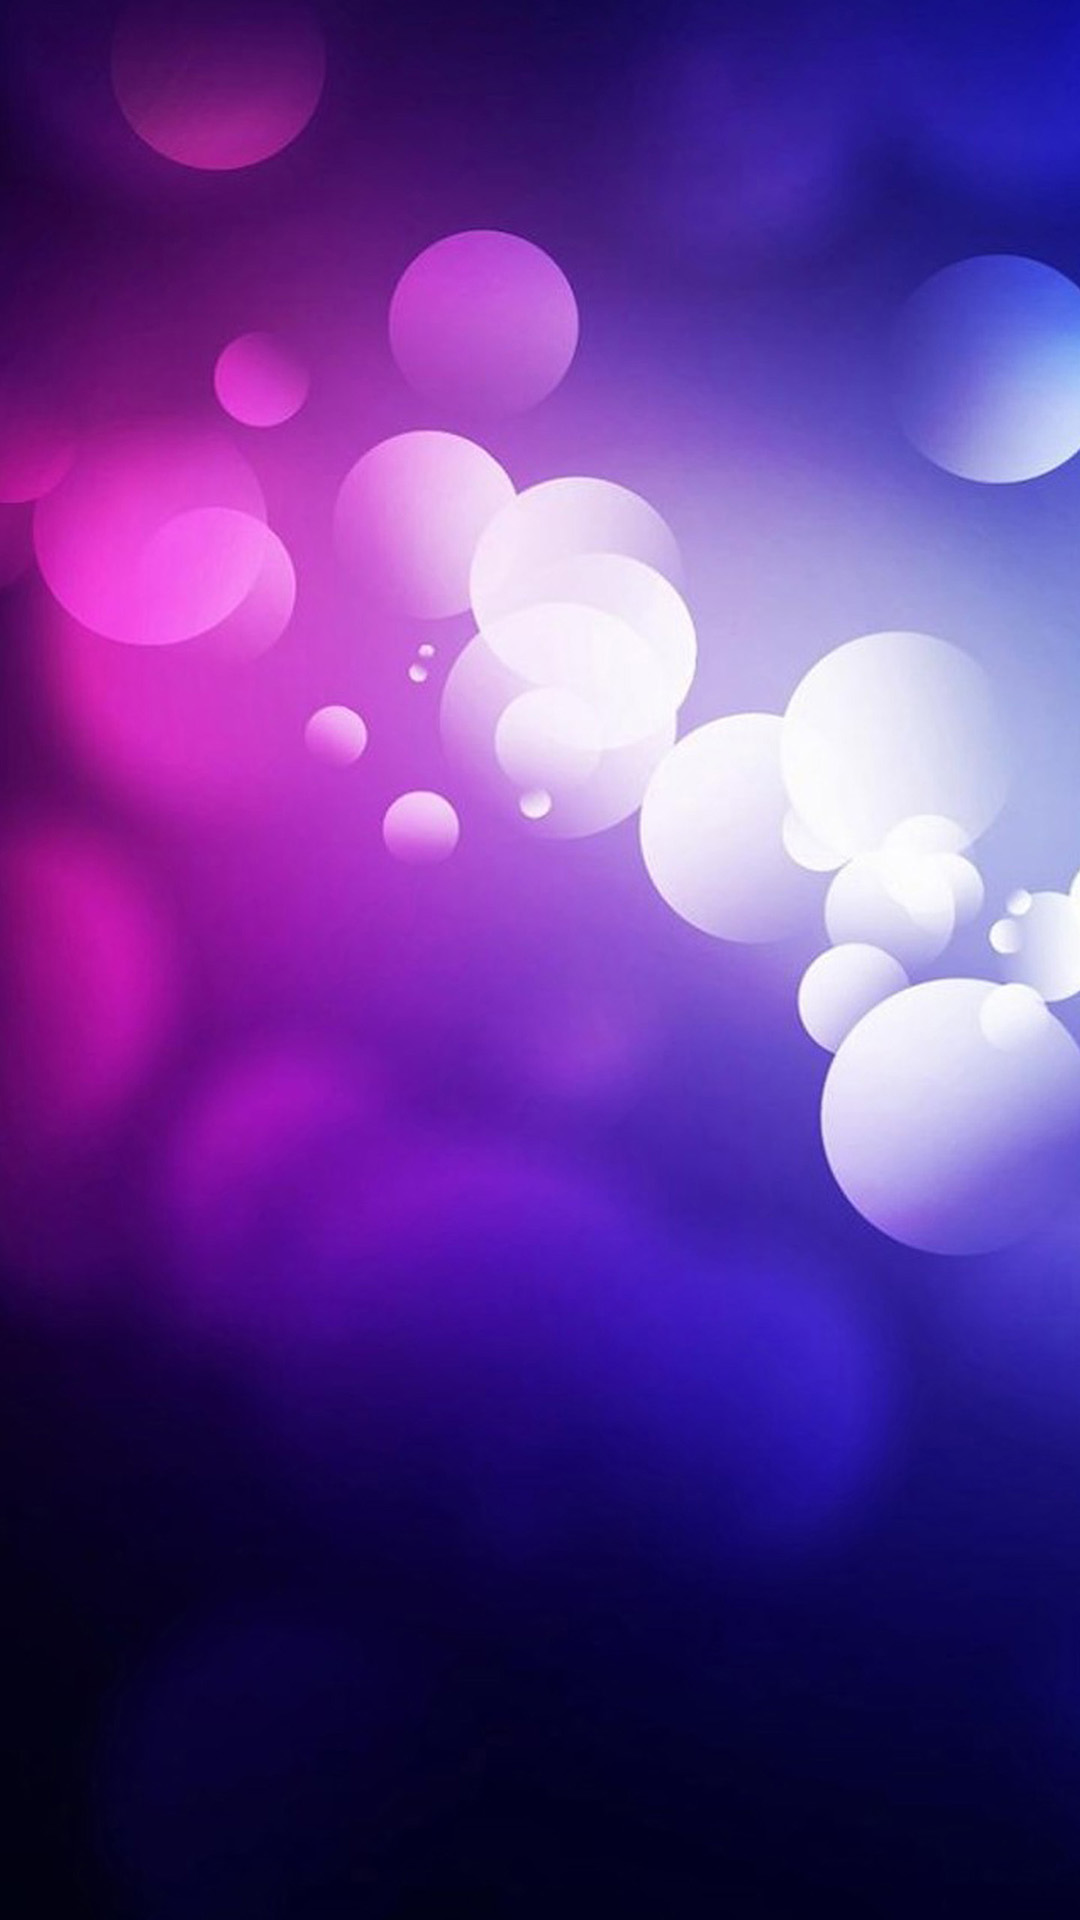 Galaxy S5 Purple Abstract Bubbles Android Wallpaper free download